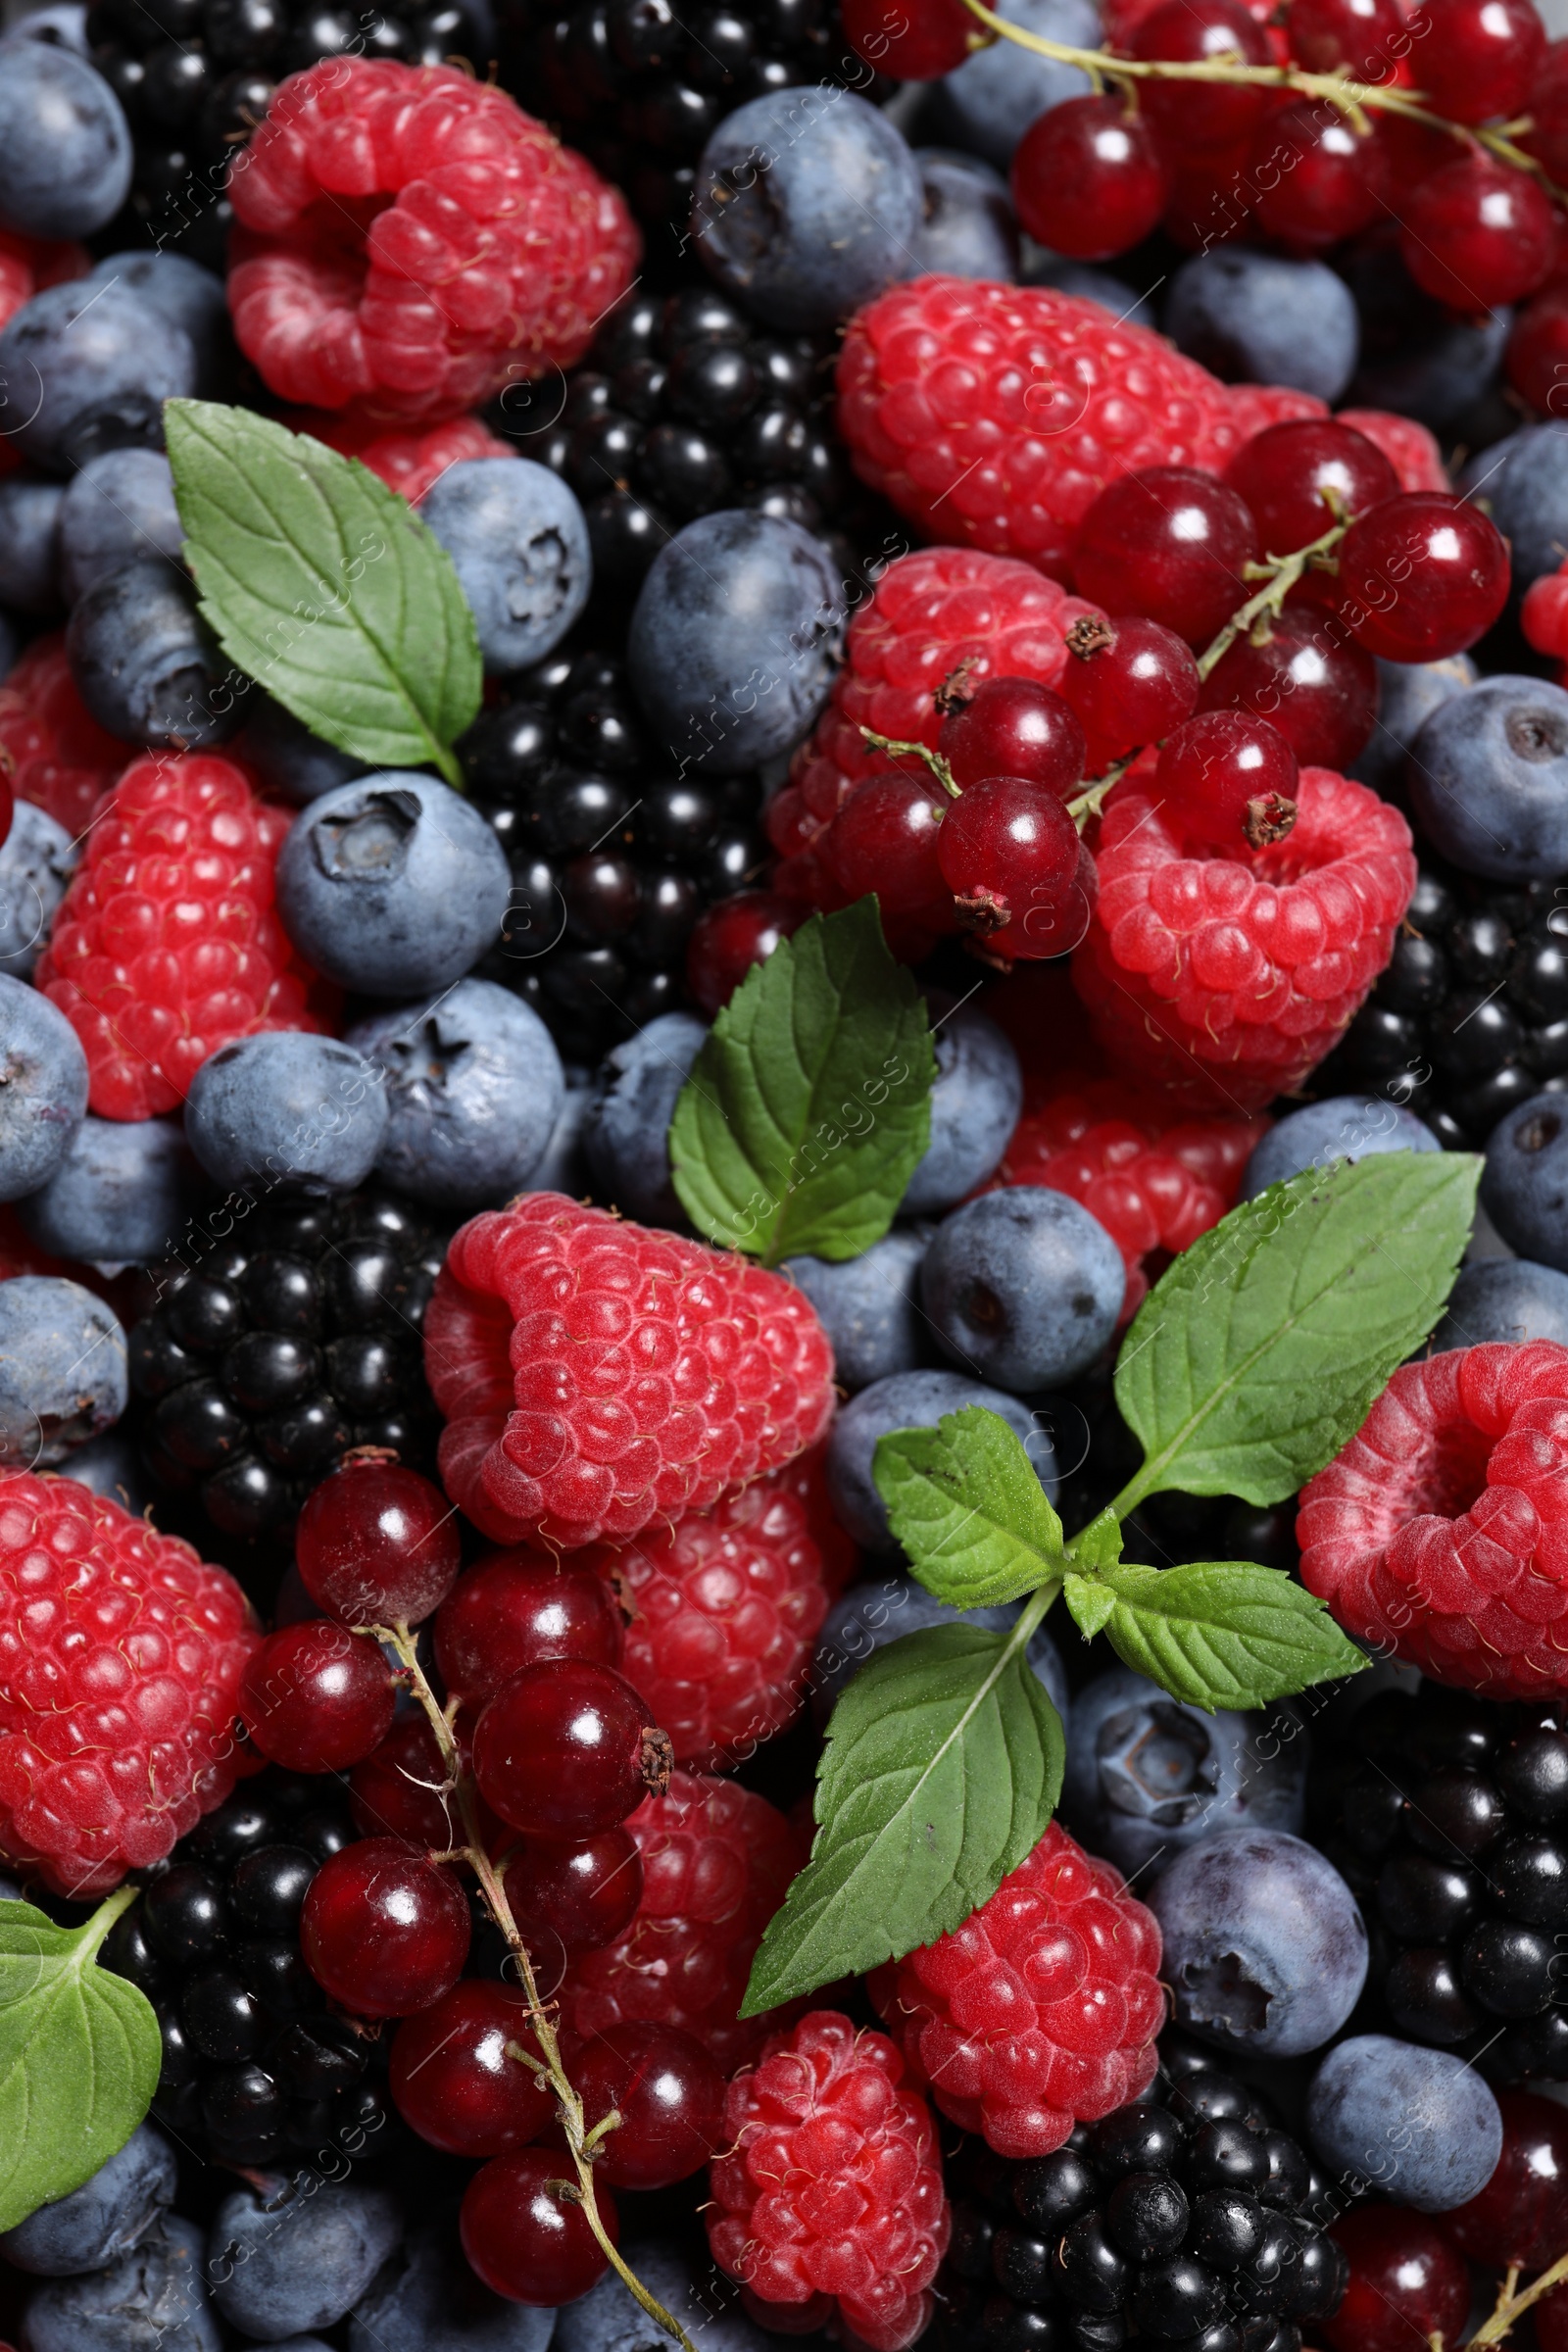 Photo of Assortment of fresh ripe berries with green leaves as background, top view